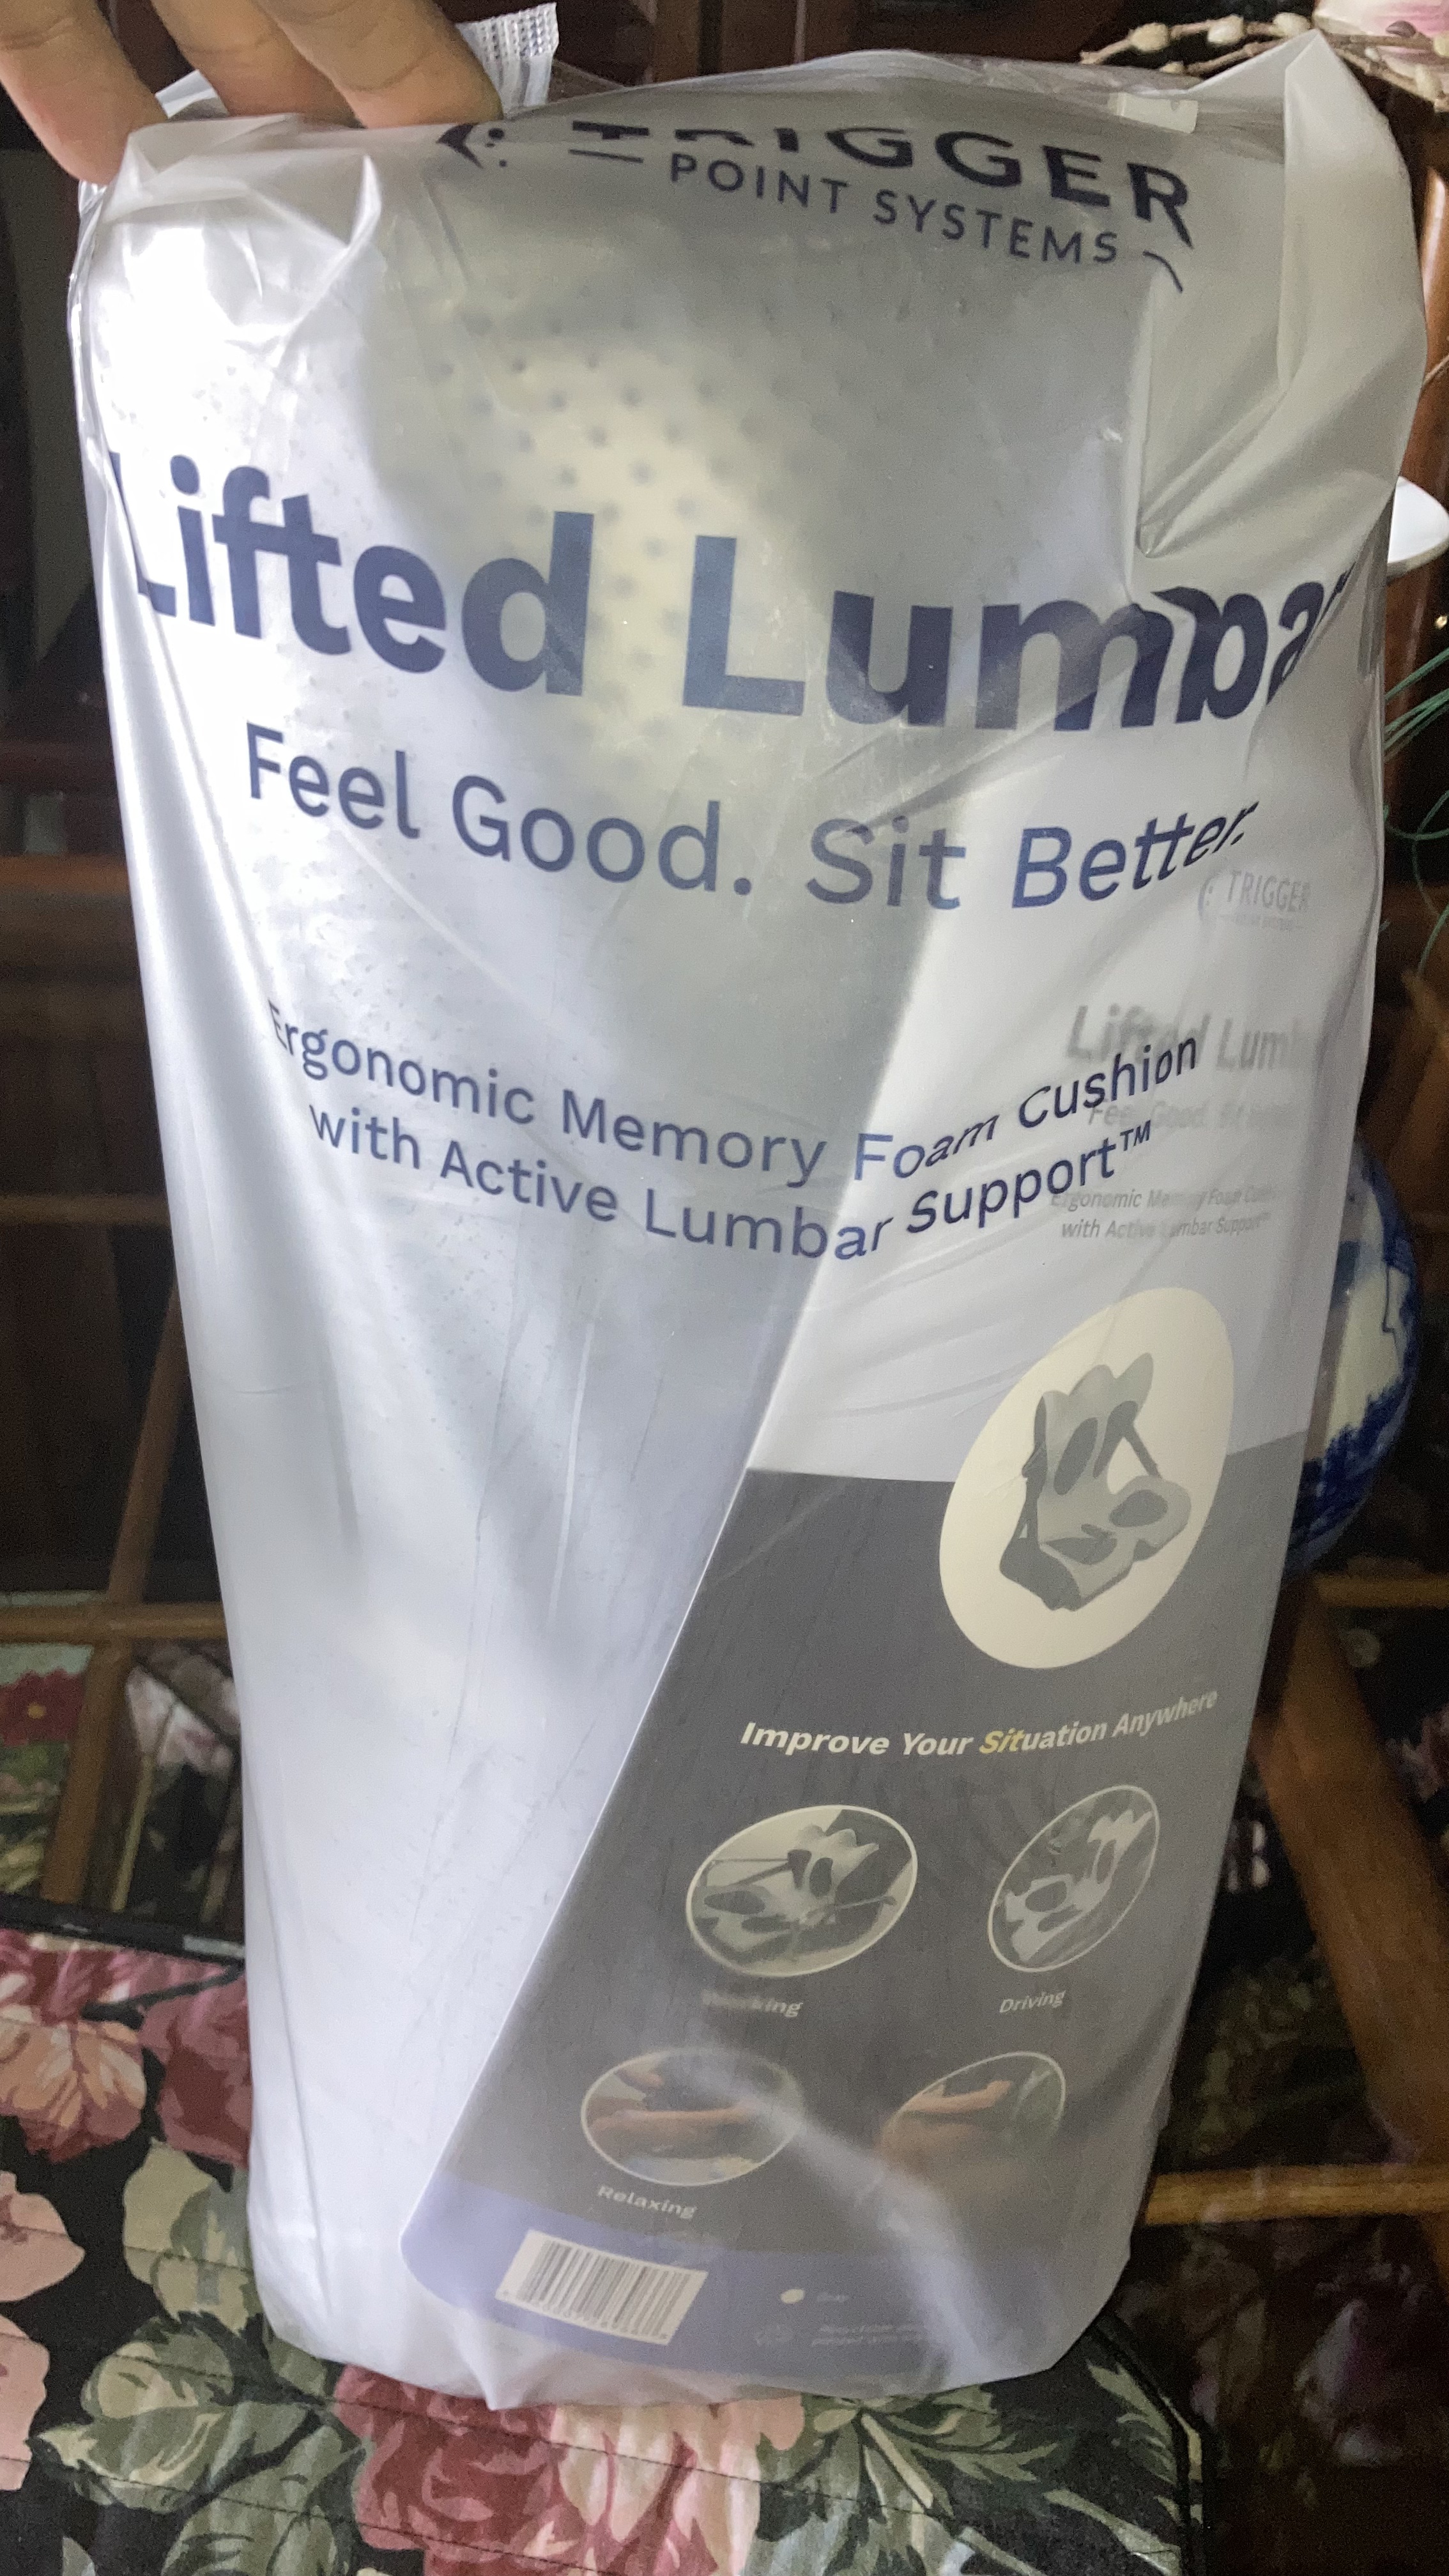 Lifted Lumbar in the package